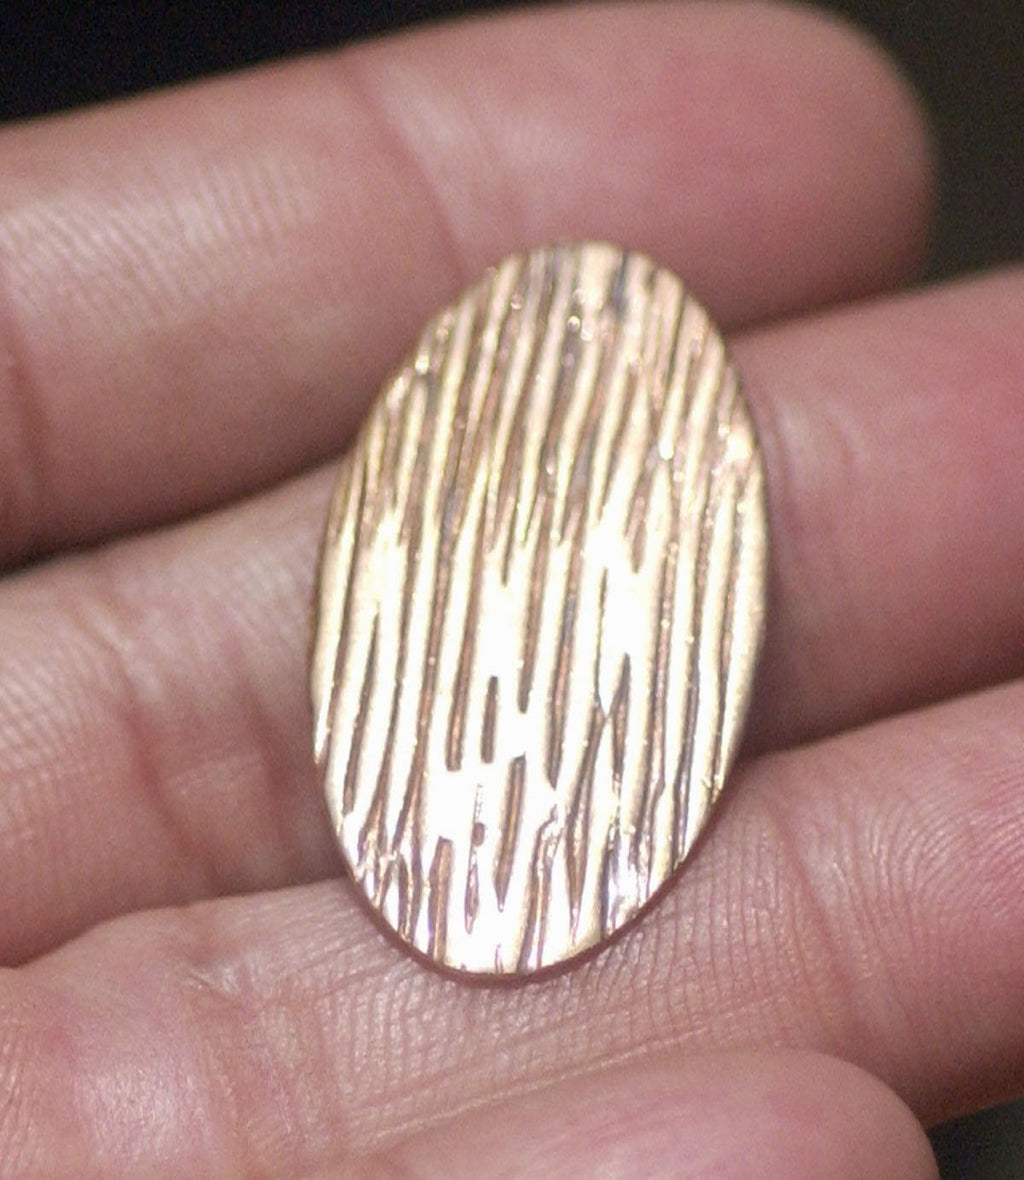 Woodgrain Pattern Oval 30mm x 17mm 24g Blanks Shape for Enameling Stamping Texturing Variety of Metals